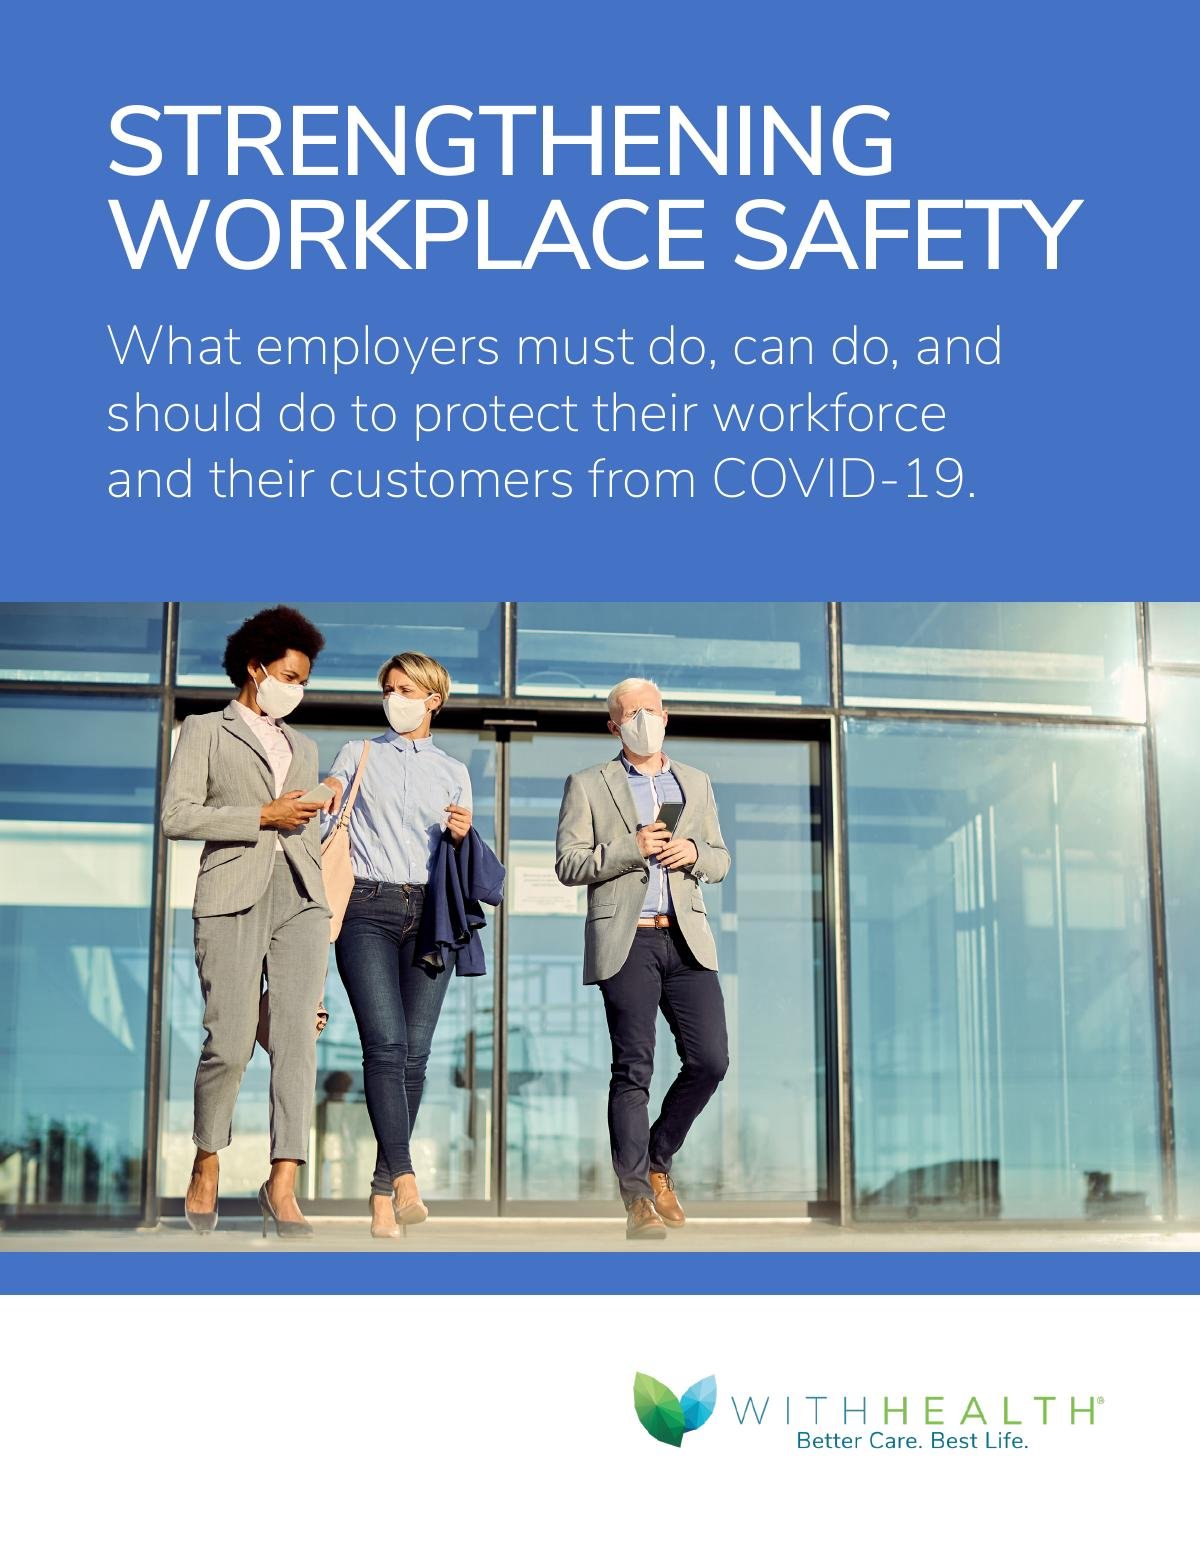 Strengthening Workplace Safety - What Employers Must Do, Can Do, and Should Do